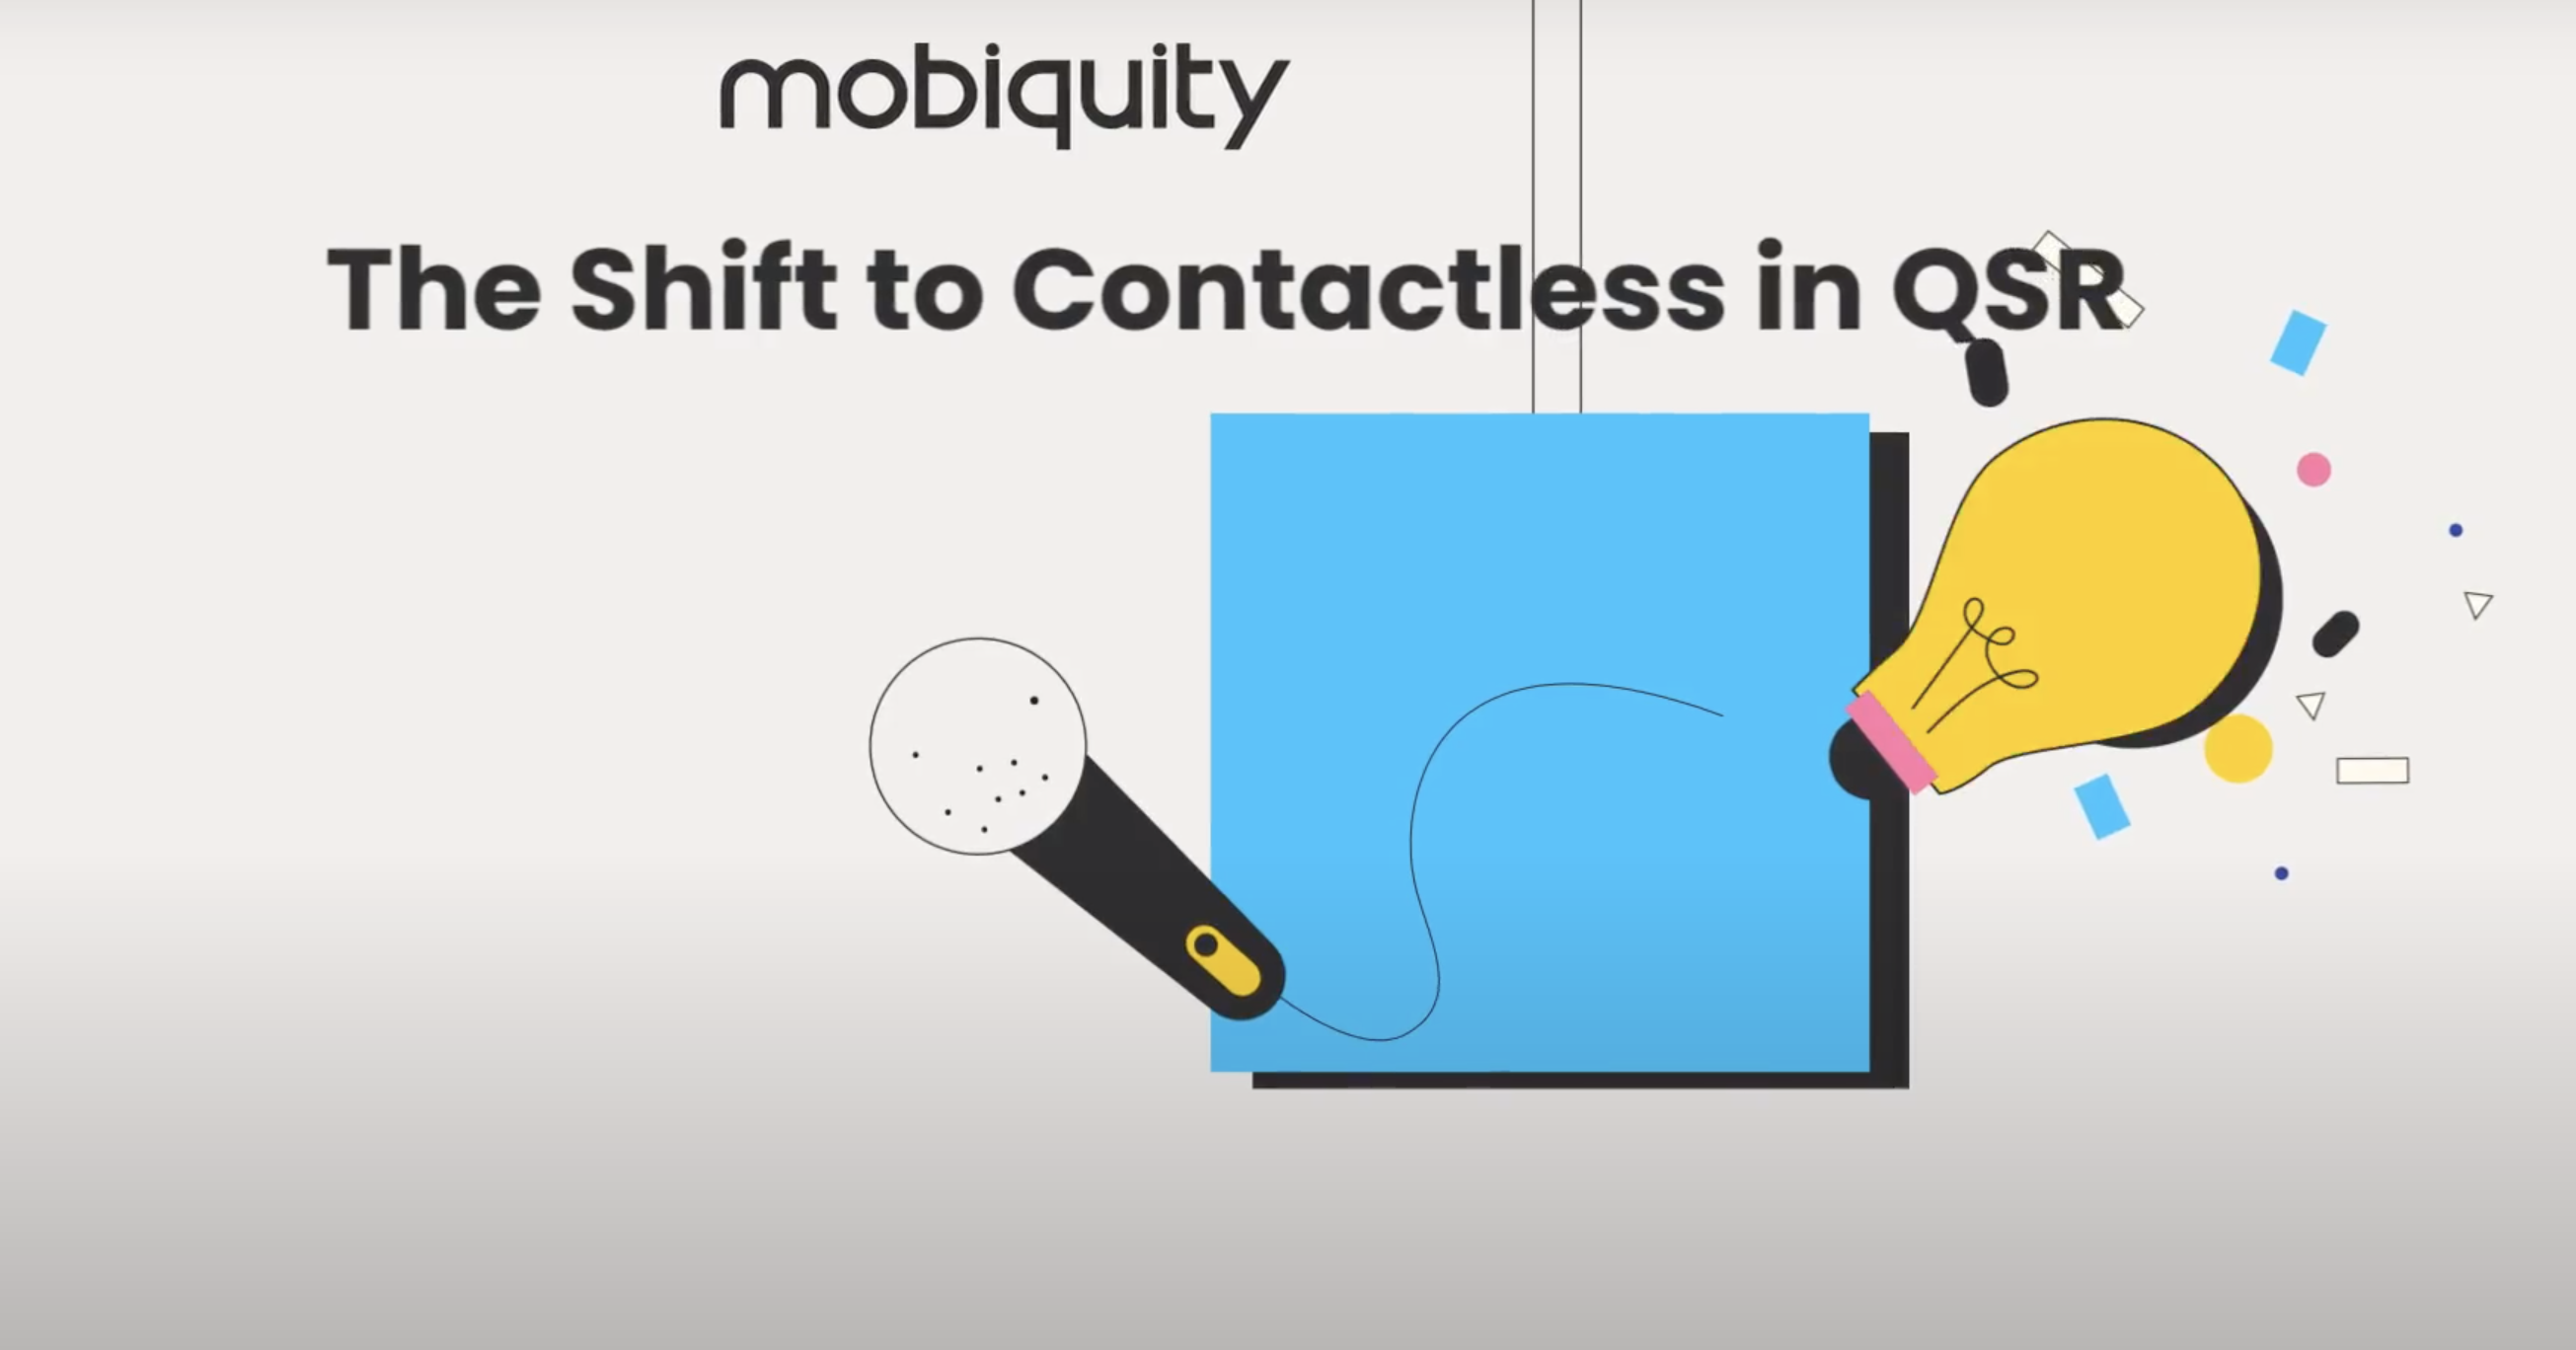 22_Mobiquity Minute_Britt Mills_The Shift to Contactless in QSR_Rev02_Captioned